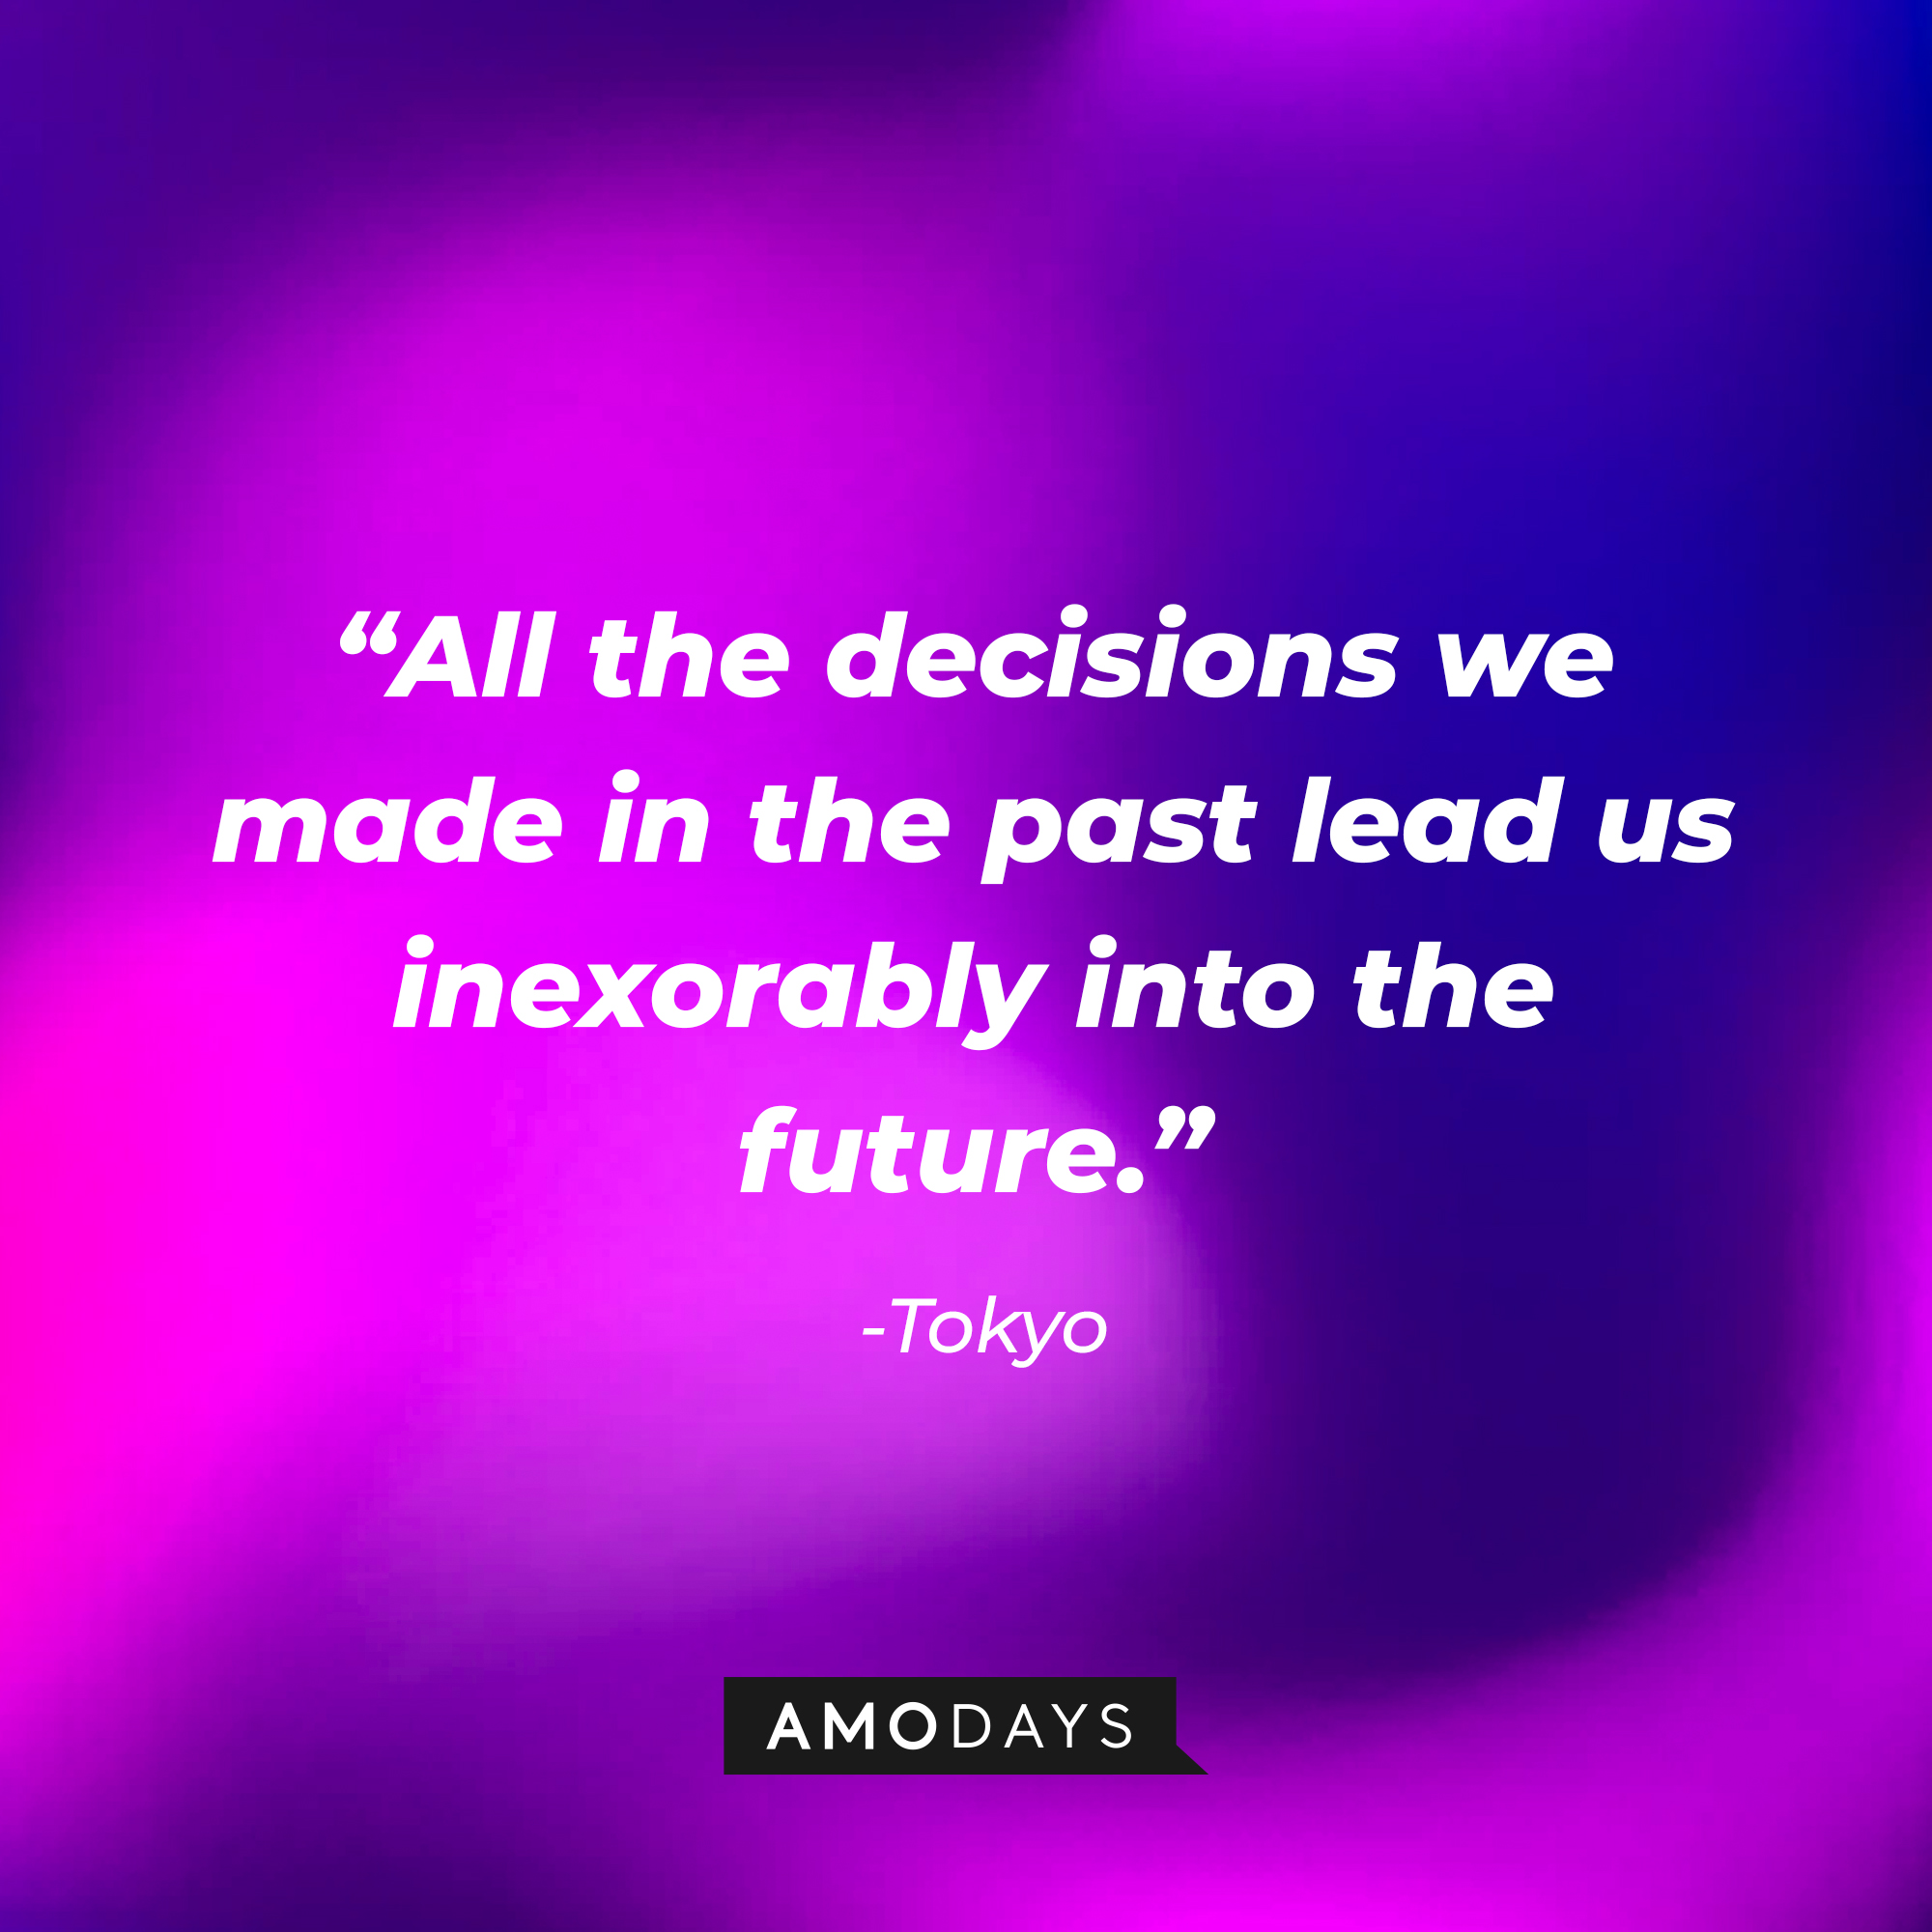 Tokyo’s  quote: “All the decisions we made in the past lead us inexorably into the future.” | Source: AmoDays